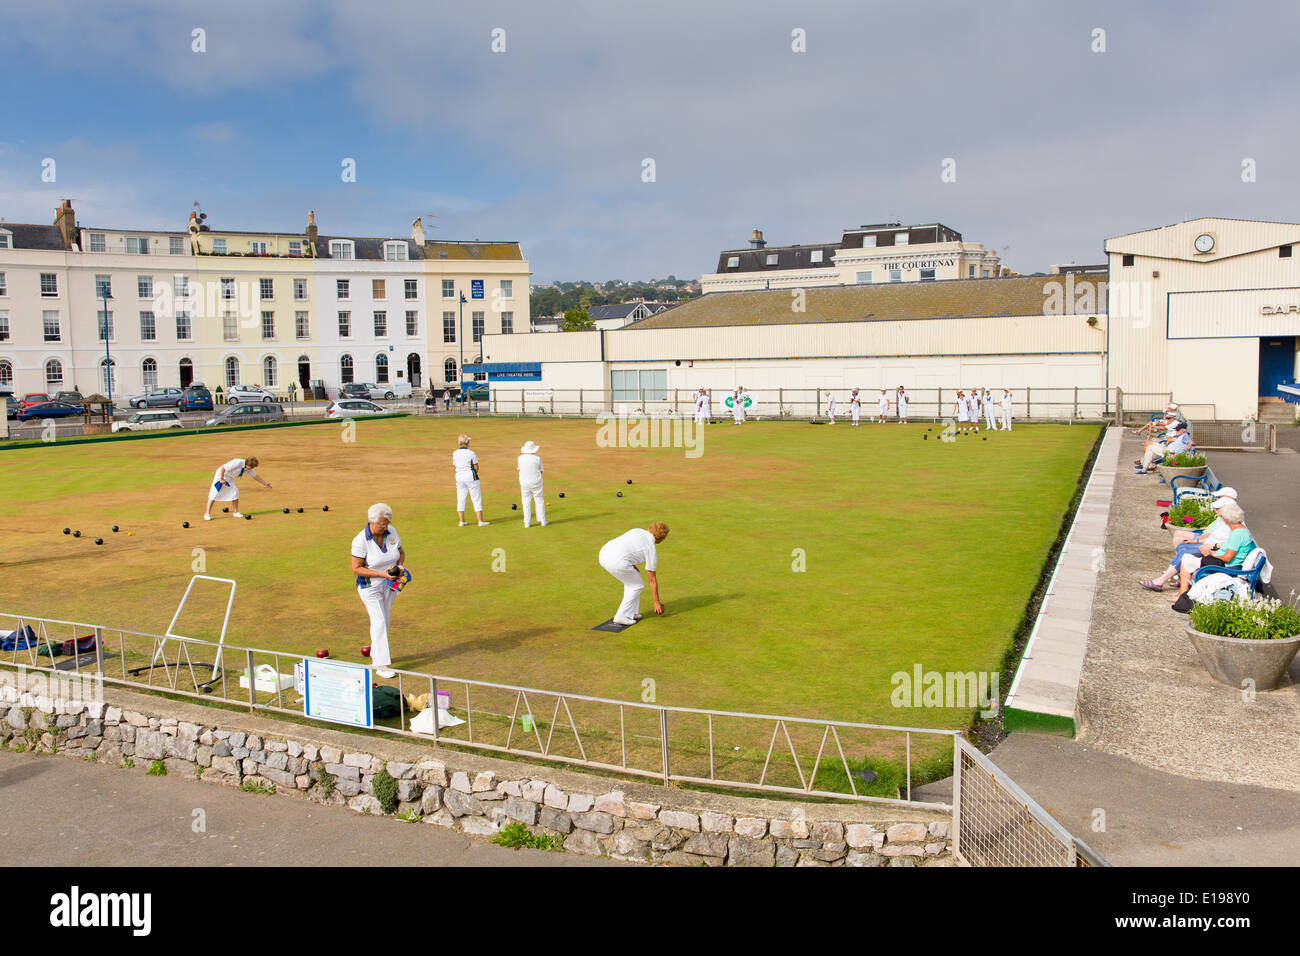 Bowls on bowling green Teignmouth Devon with players in white Stock Photo